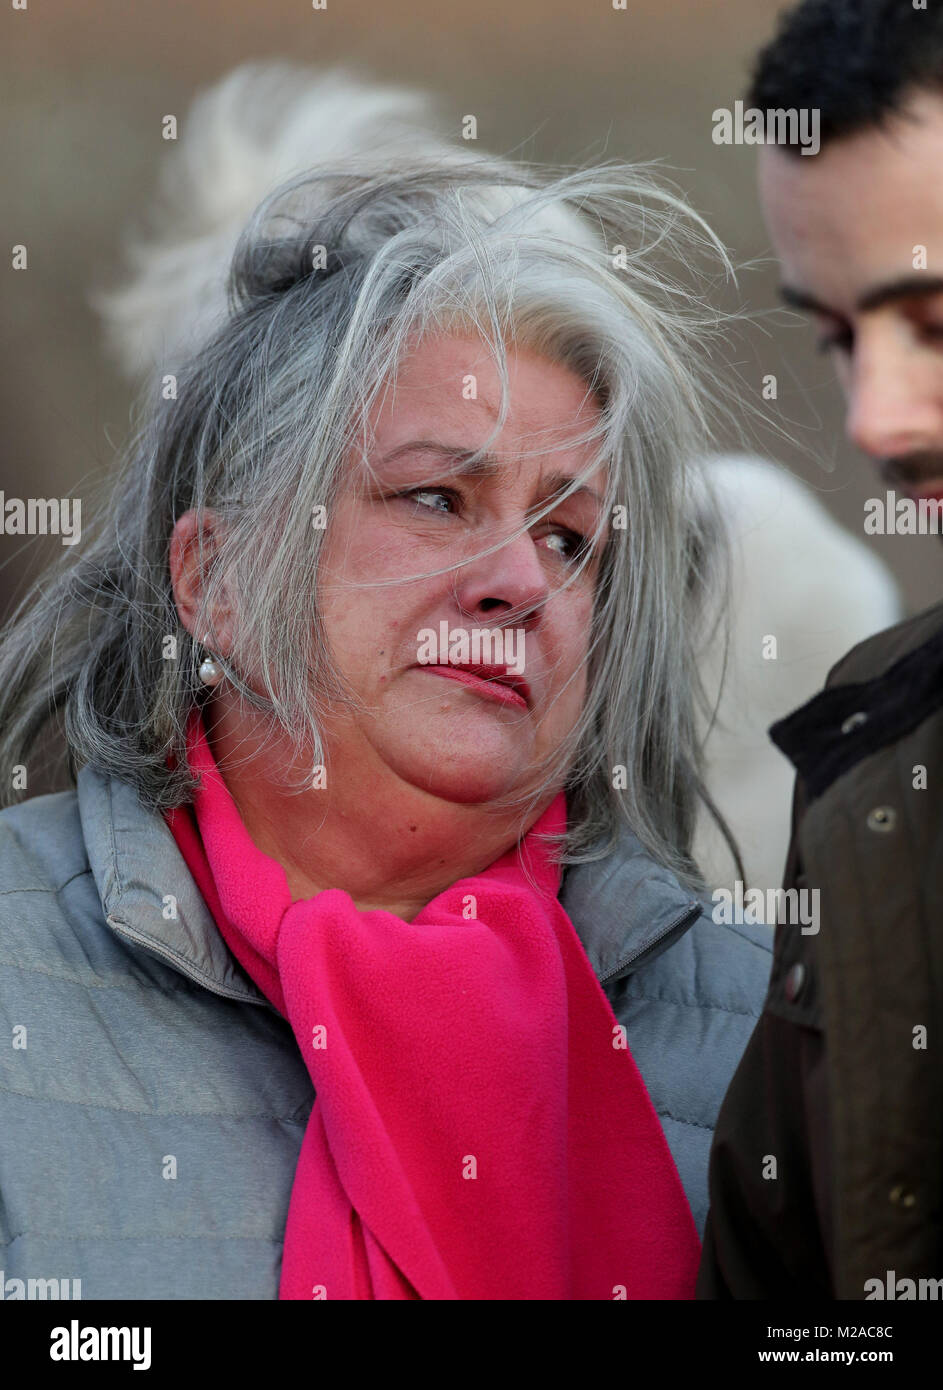 Joanne McLaren, mother of Molly McLaren, listens to a statement read out by Sergeant Ali Walton as she leaves Maidstone Crown Court in Kent following the conviction of Joshua Stimpson who murdered her daughter Molly last year. Stock Photo